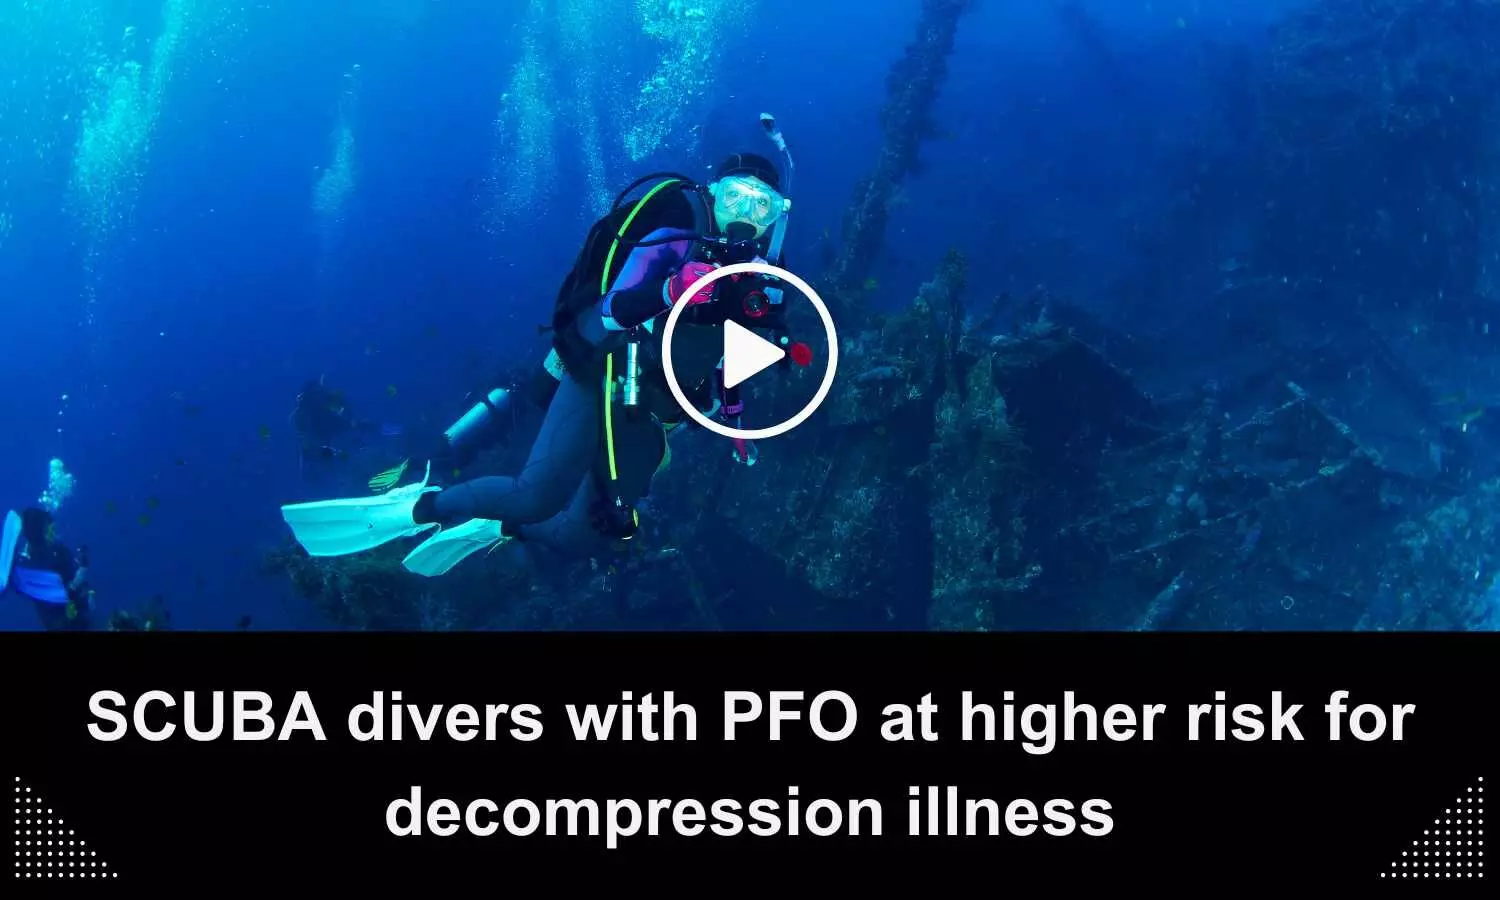 SCUBA divers with PFO at higher risk for decompression illness